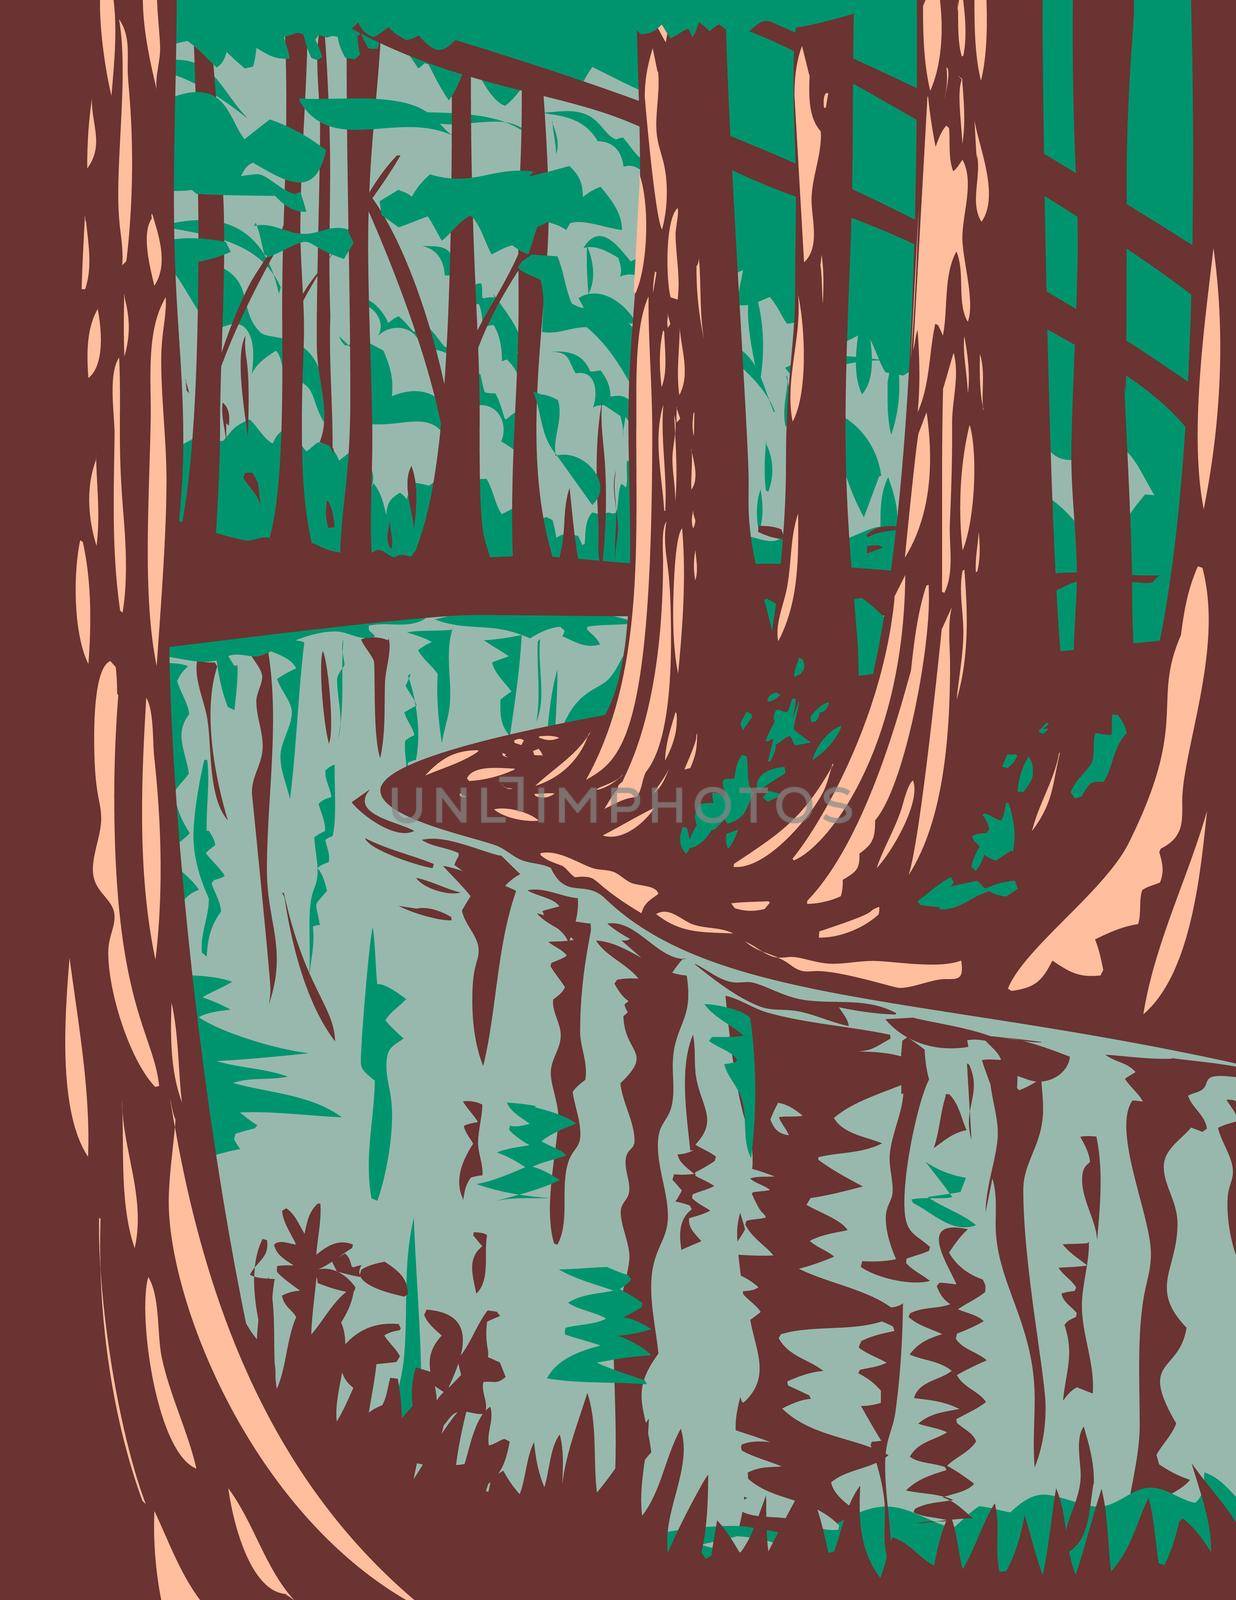 WPA poster art of Cedar Creek, a blackwater stream that runs through the Congaree National Park in central South Carolina, United States in works project administration or federal art project style.